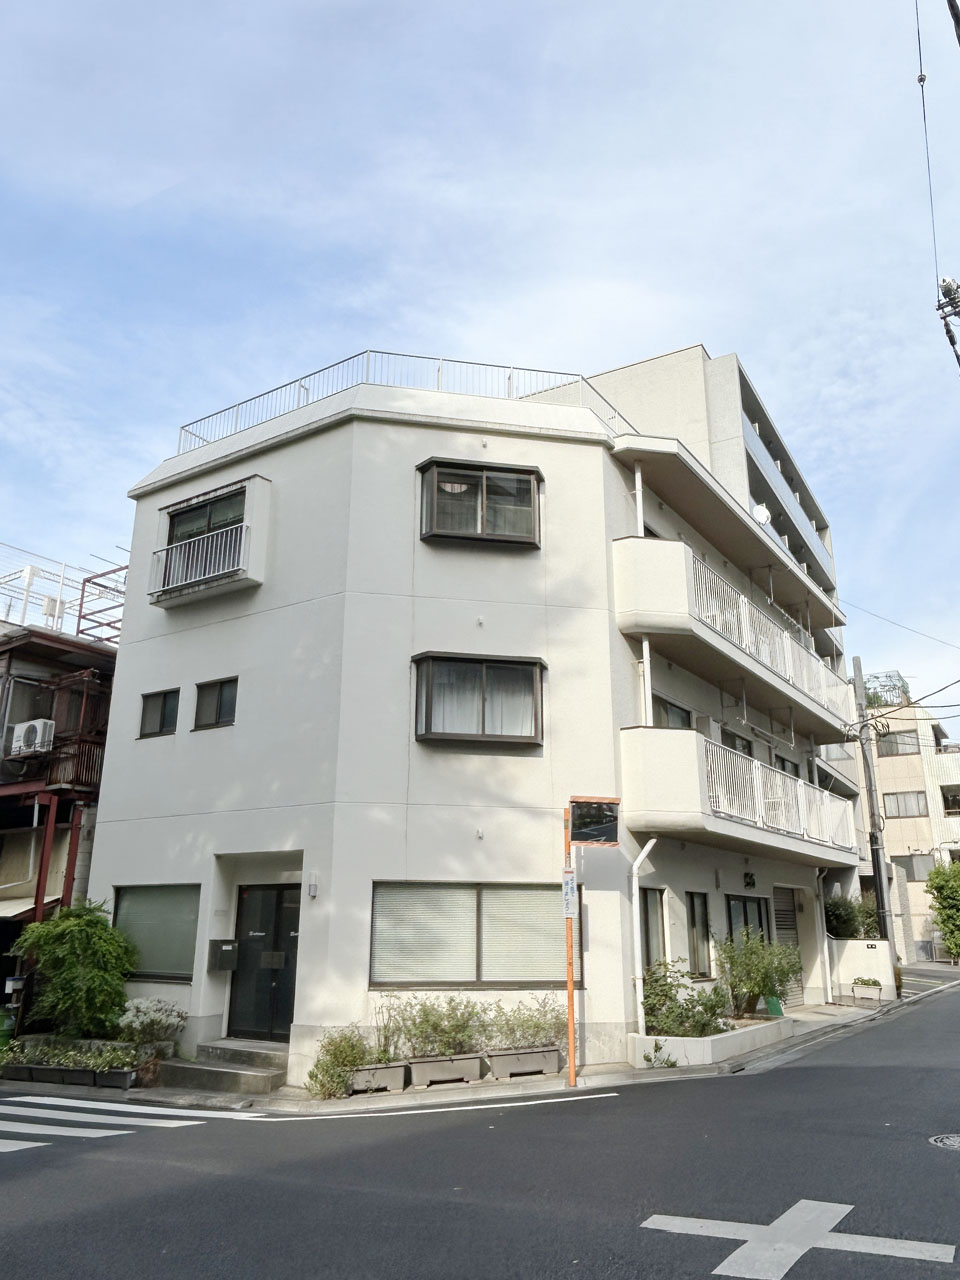 Office space for rent on the first floor of Wasedacho, Shinjuku-ku